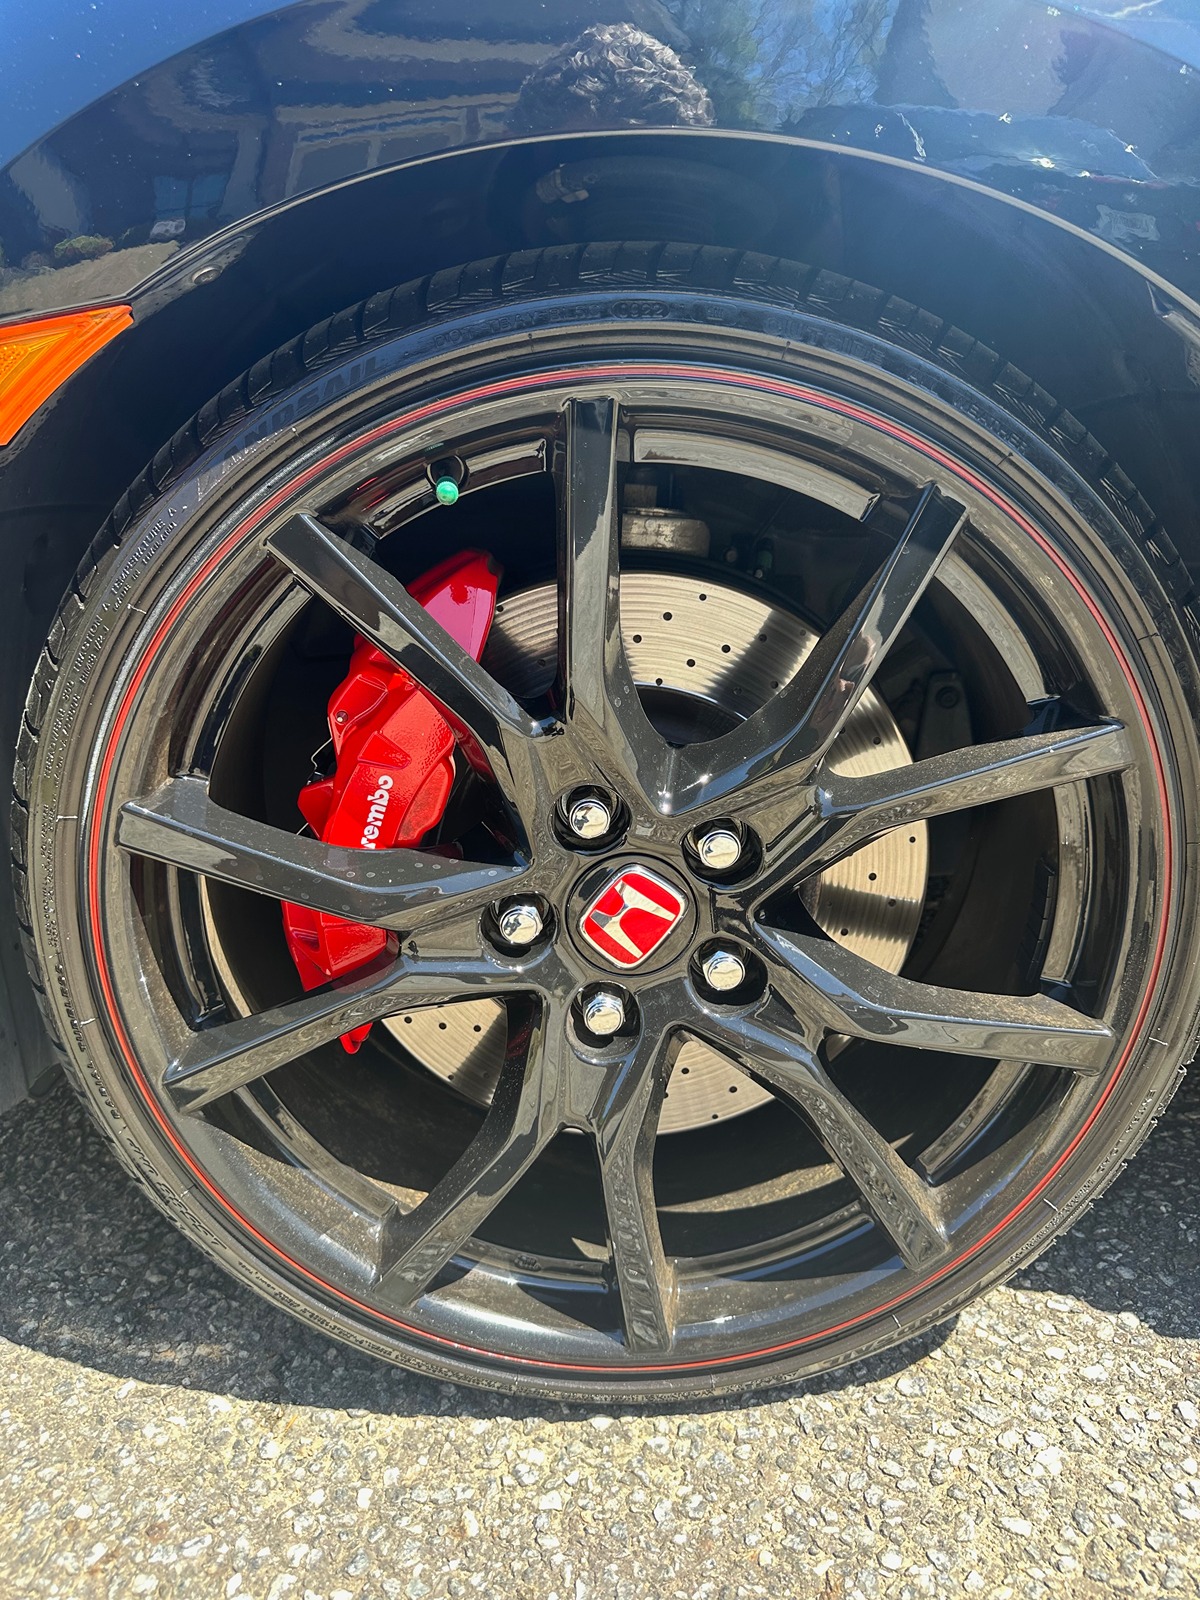 Honda Civic 10th gen Sold. 2019 Civic Type R for sale IMG_8124